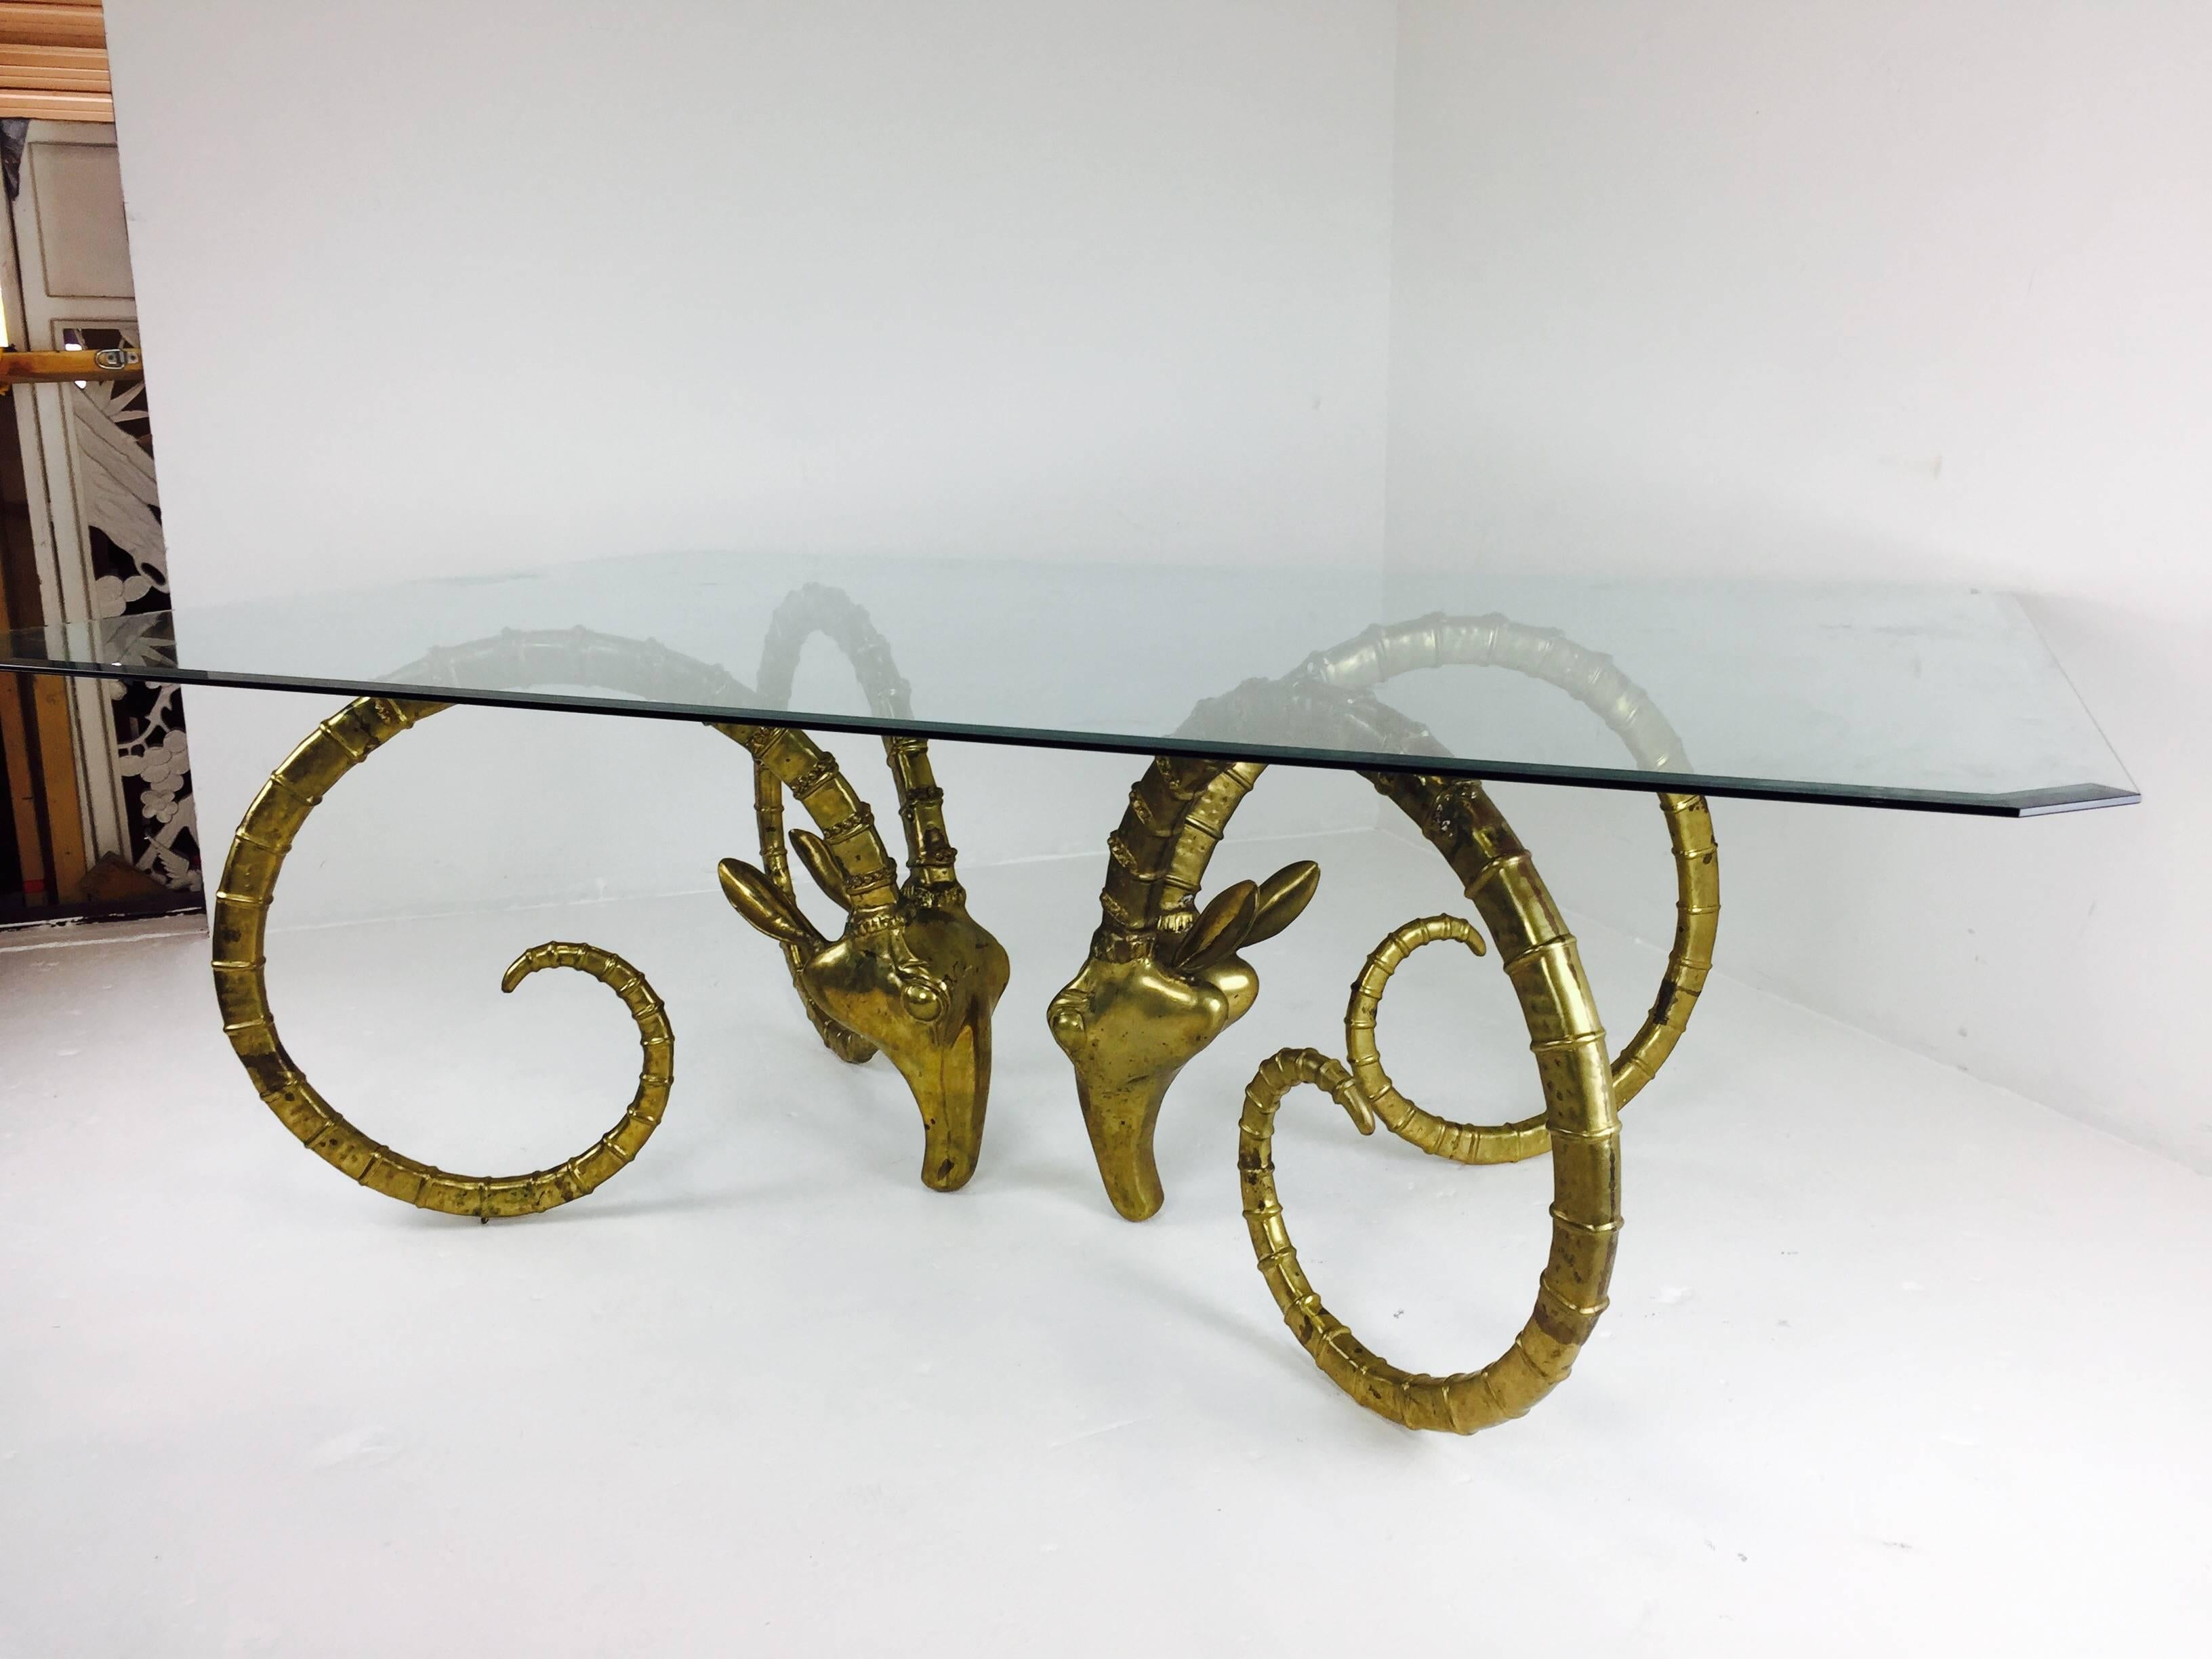 Brass ram's head or ibex dining table. Brass does have an aged patina to it. 

Dimensions: 84" L x 60" W x 29" T.
 